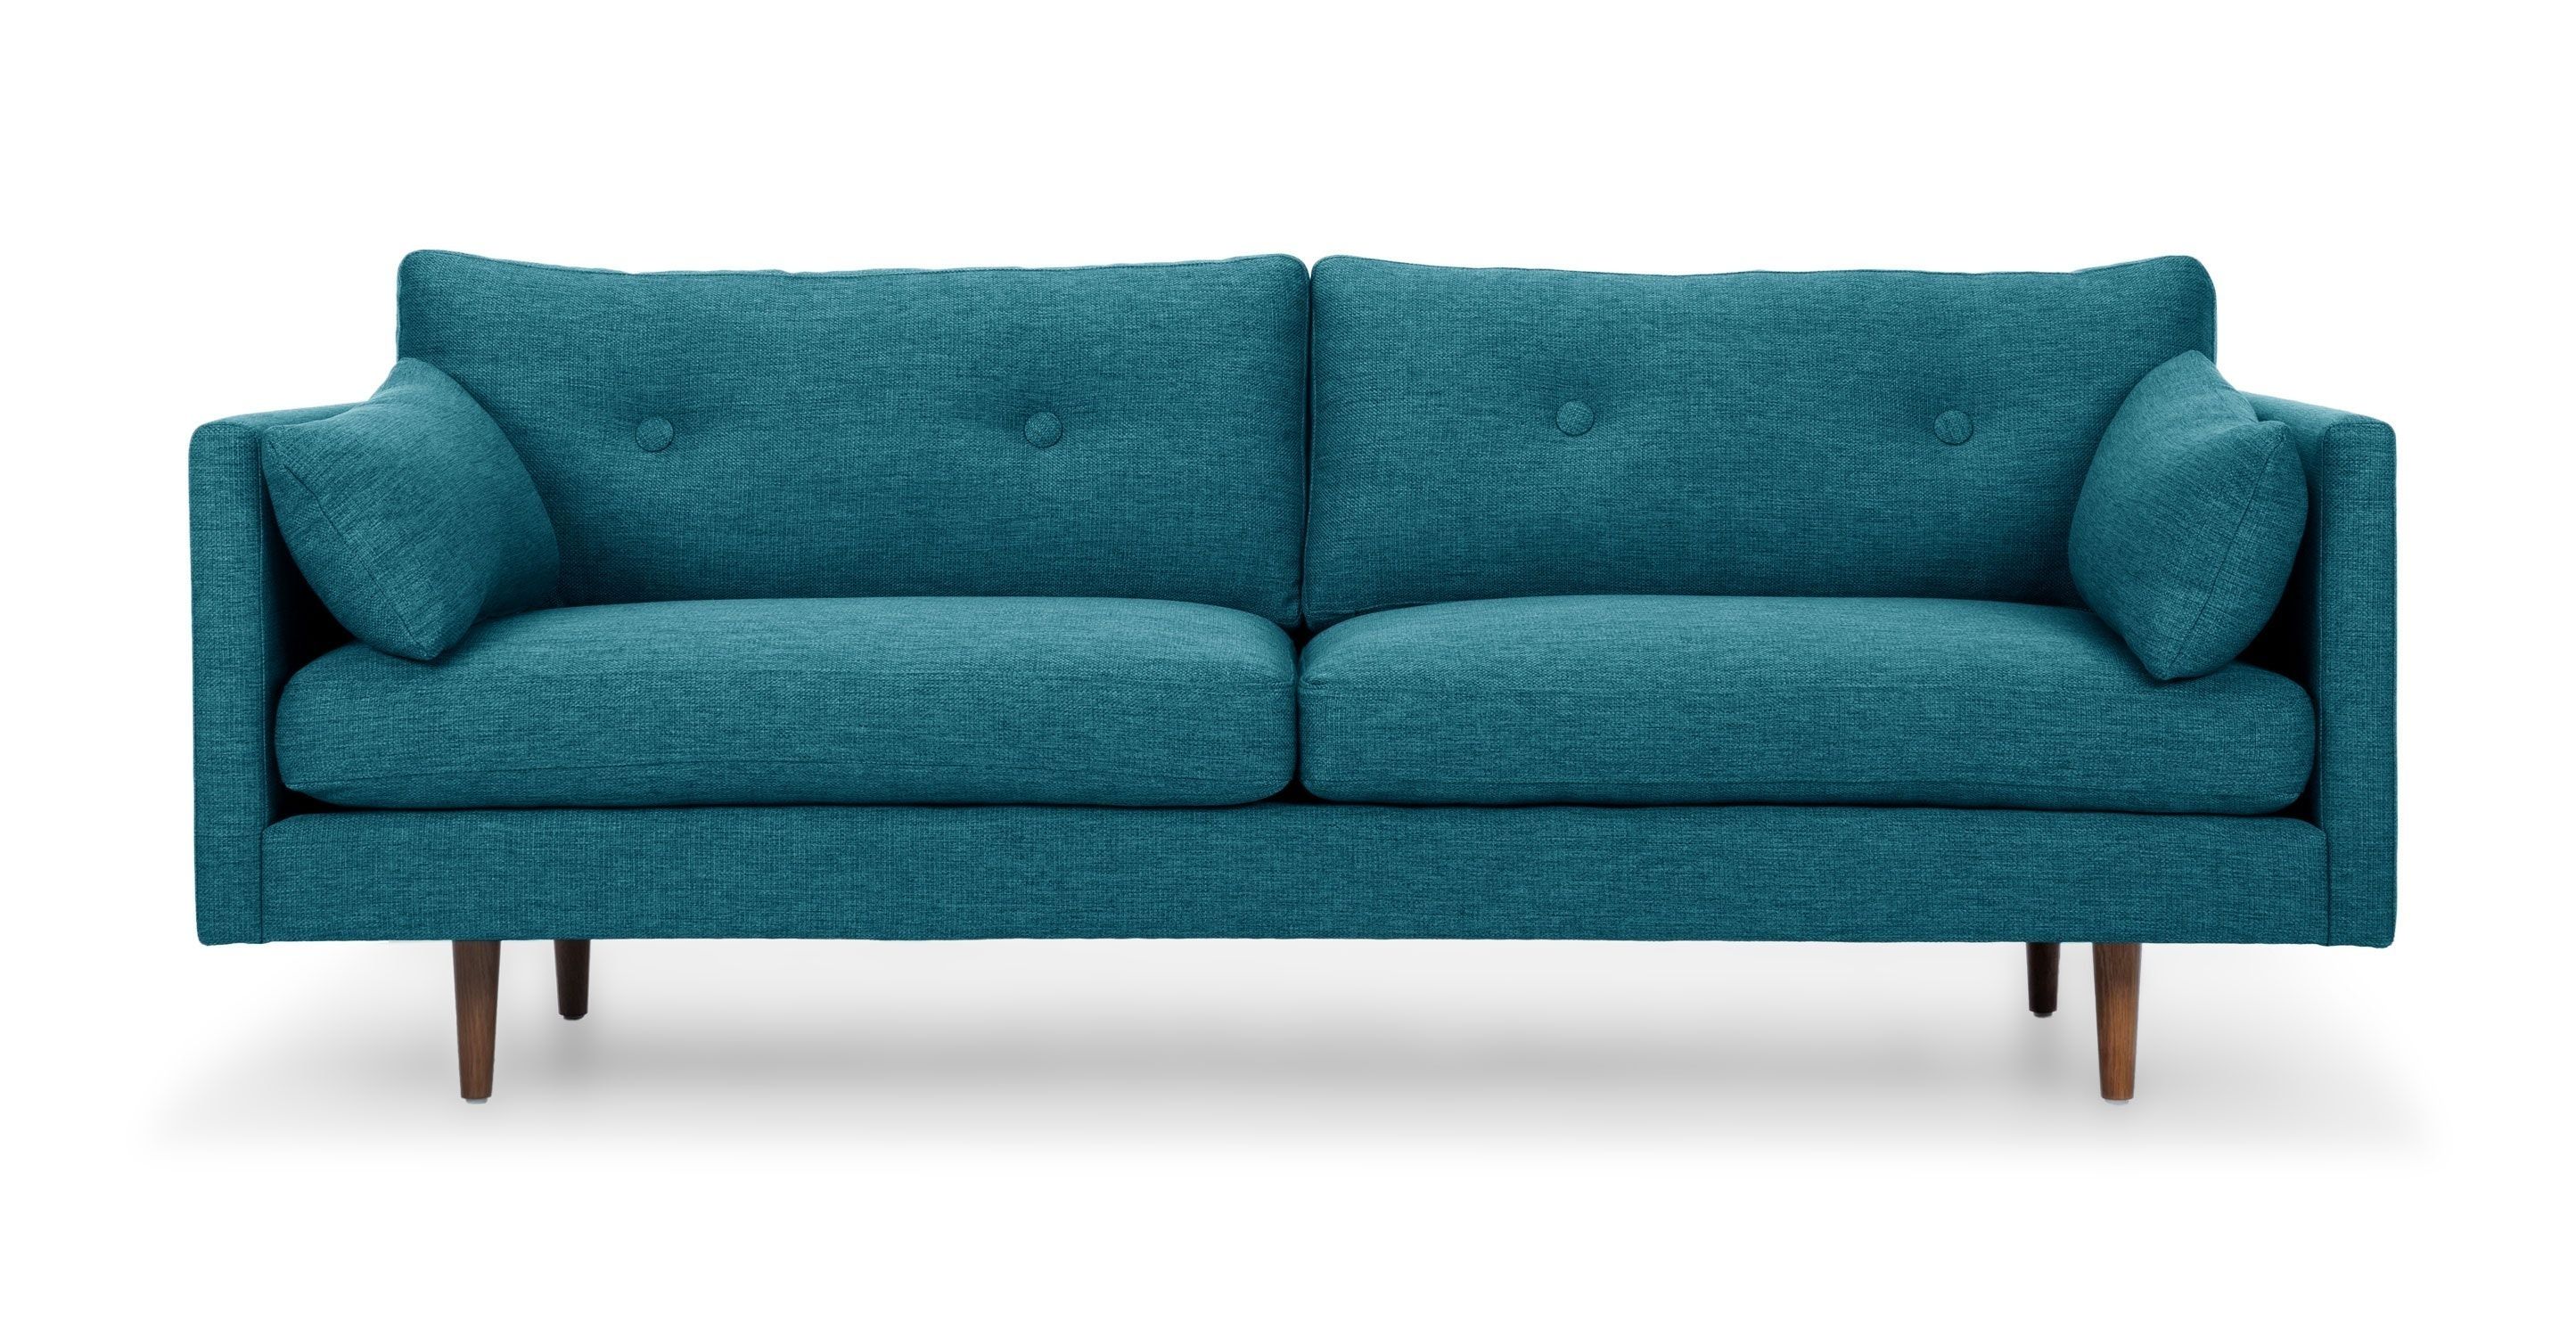 Turquoise Tufted Sofa, 3 Seat, Solid Wood Legs | Article Anton Intended For Turquoise Sofas (View 9 of 10)